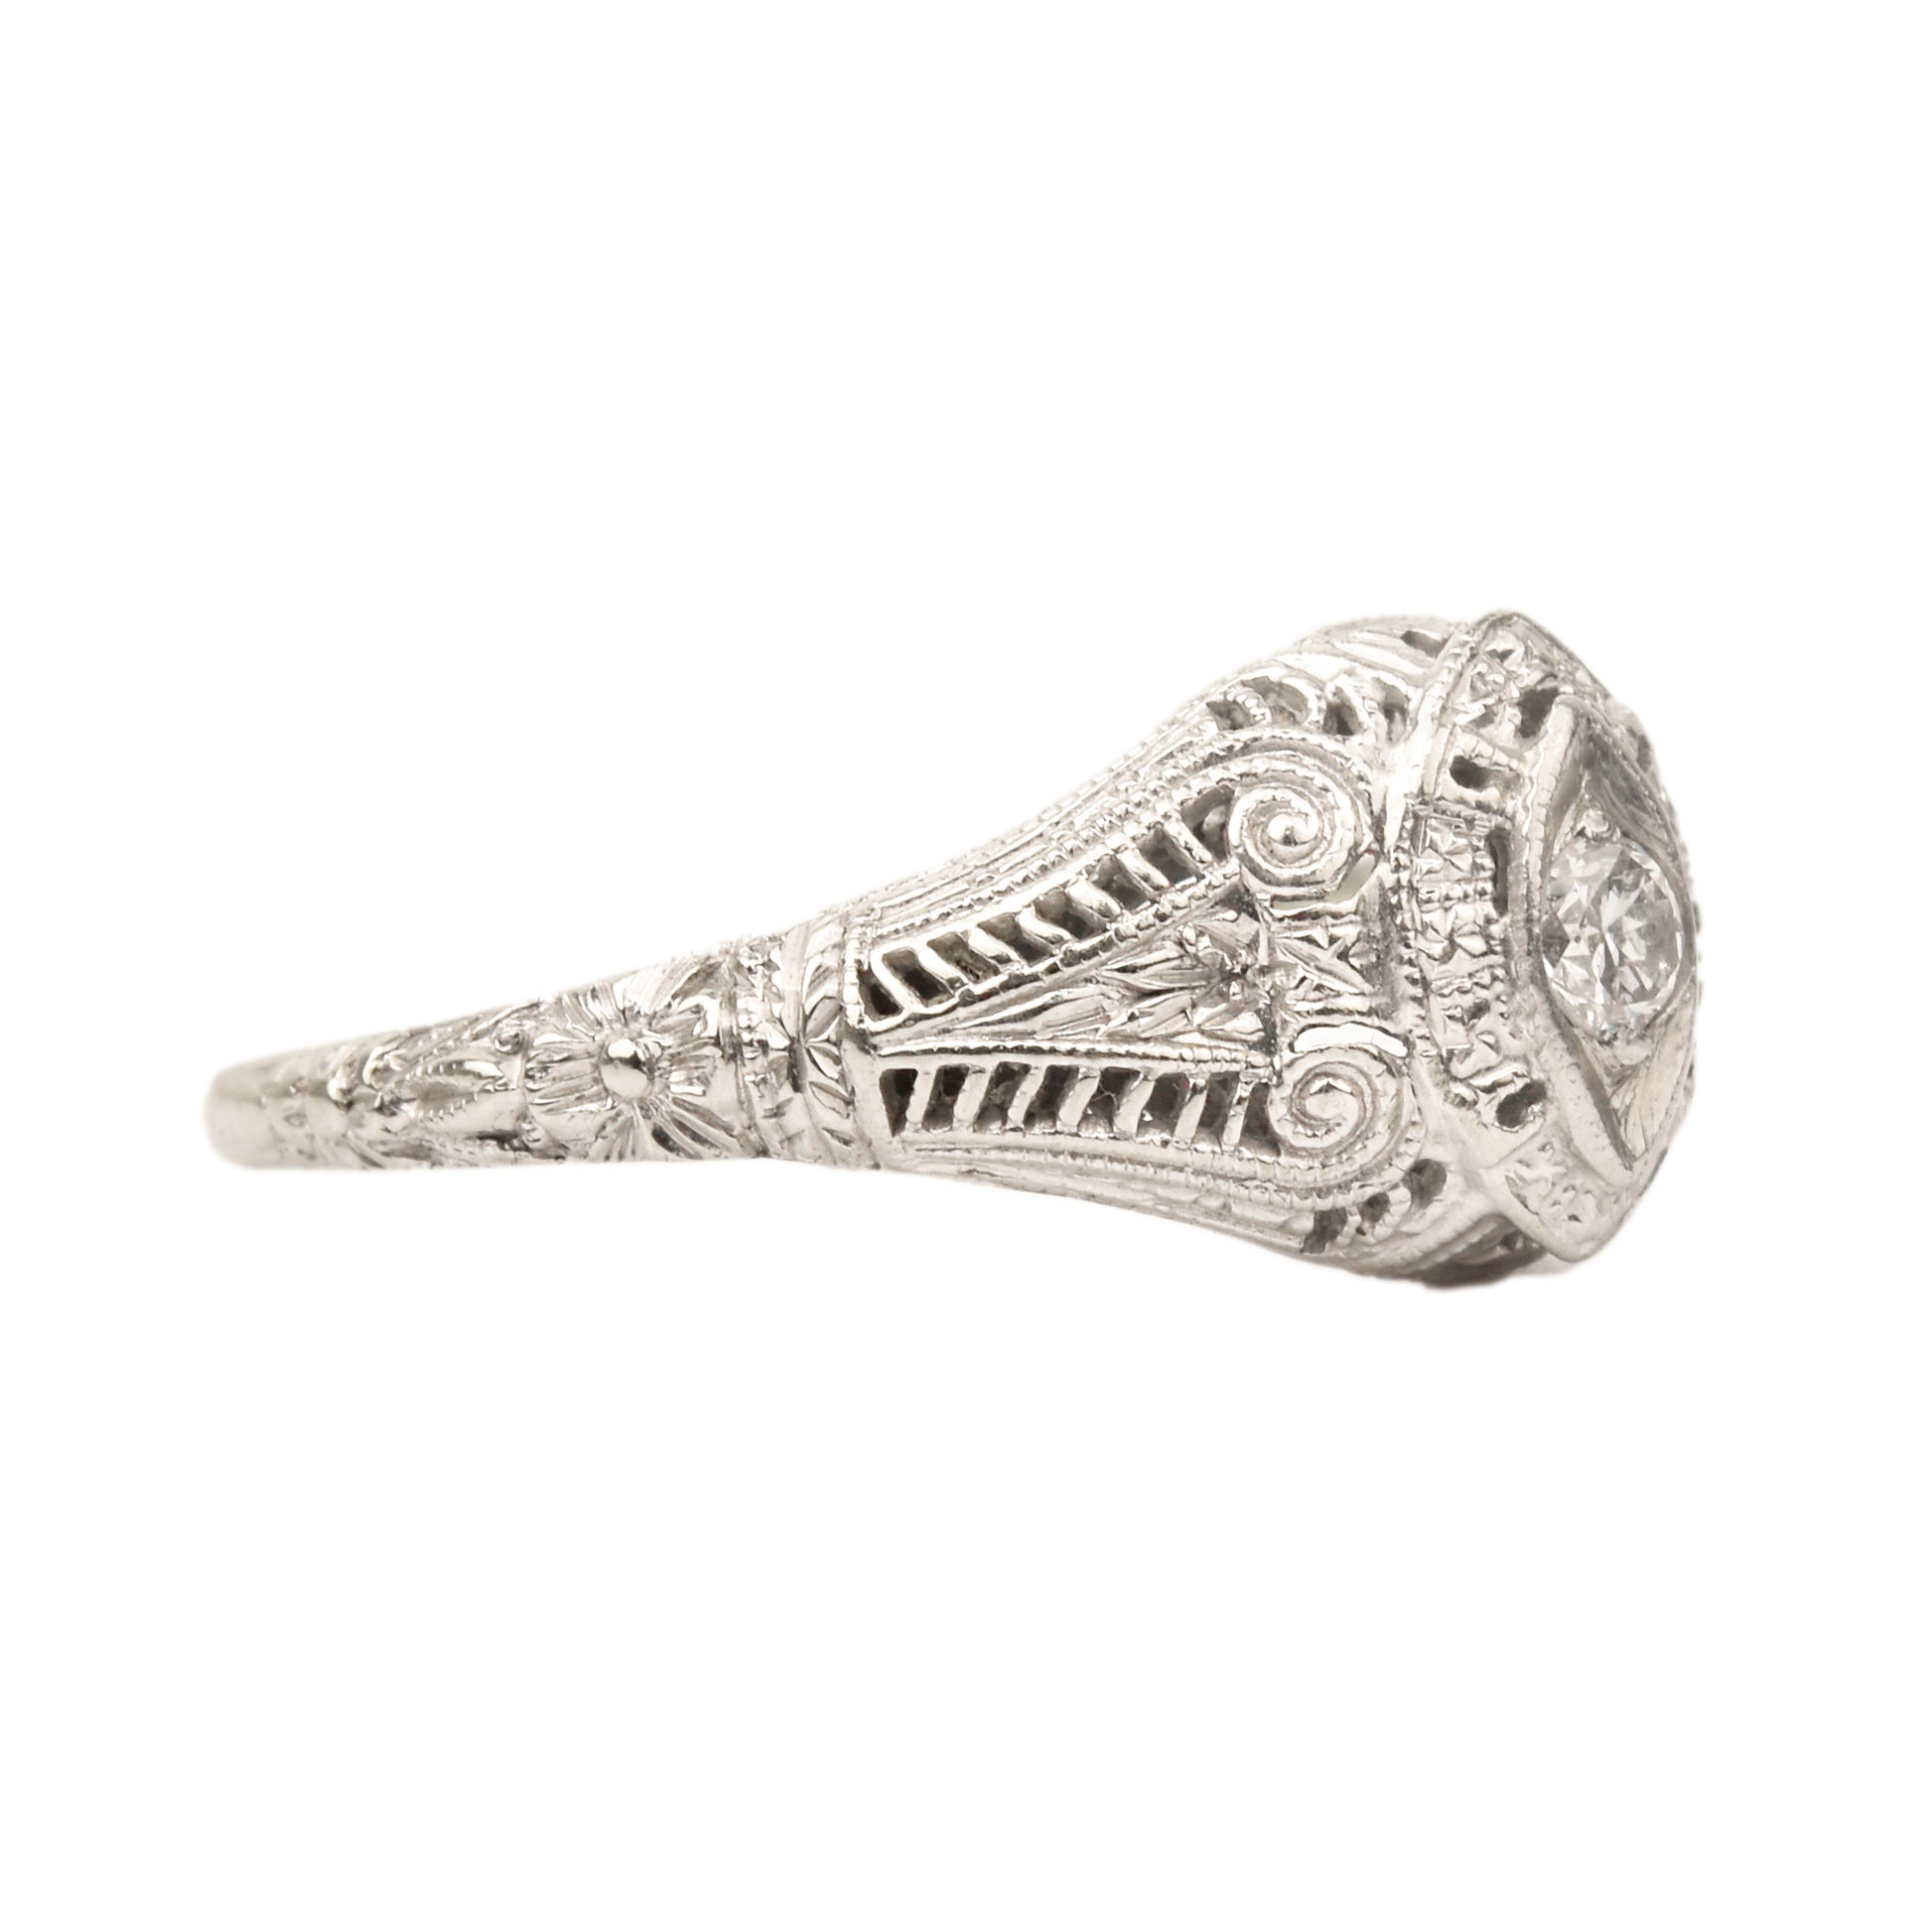 Art Deco 18K white gold filigree ring with 0.08 carat brilliant diamond, intricate detailing, size 6.25 US, isolated on white background.